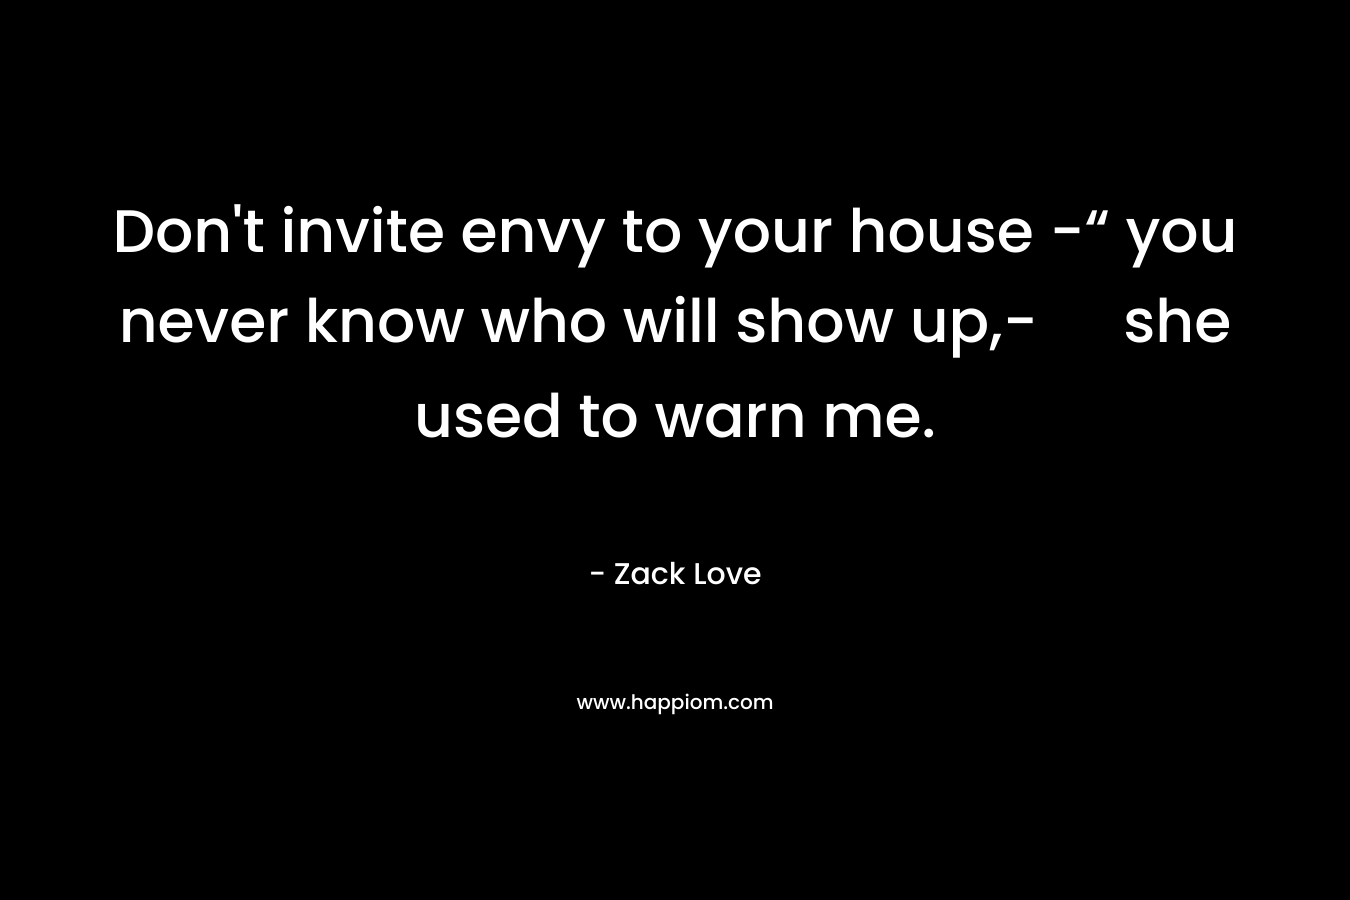 Don't invite envy to your house -“ you never know who will show up,- she used to warn me.